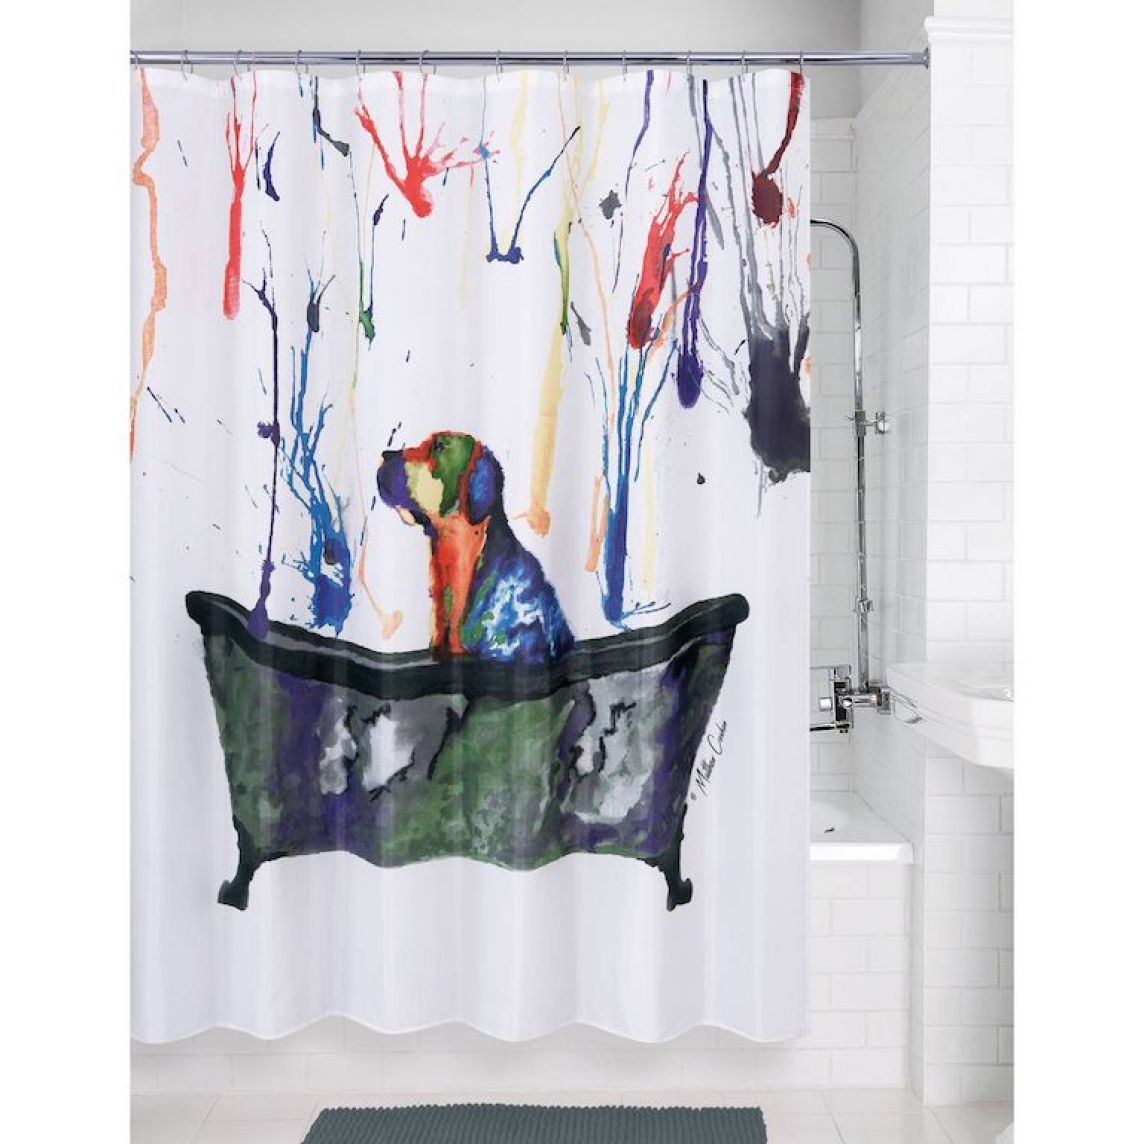 Allure Home Creation shower curtain with dog in a bathtub and multicolored paint splashes